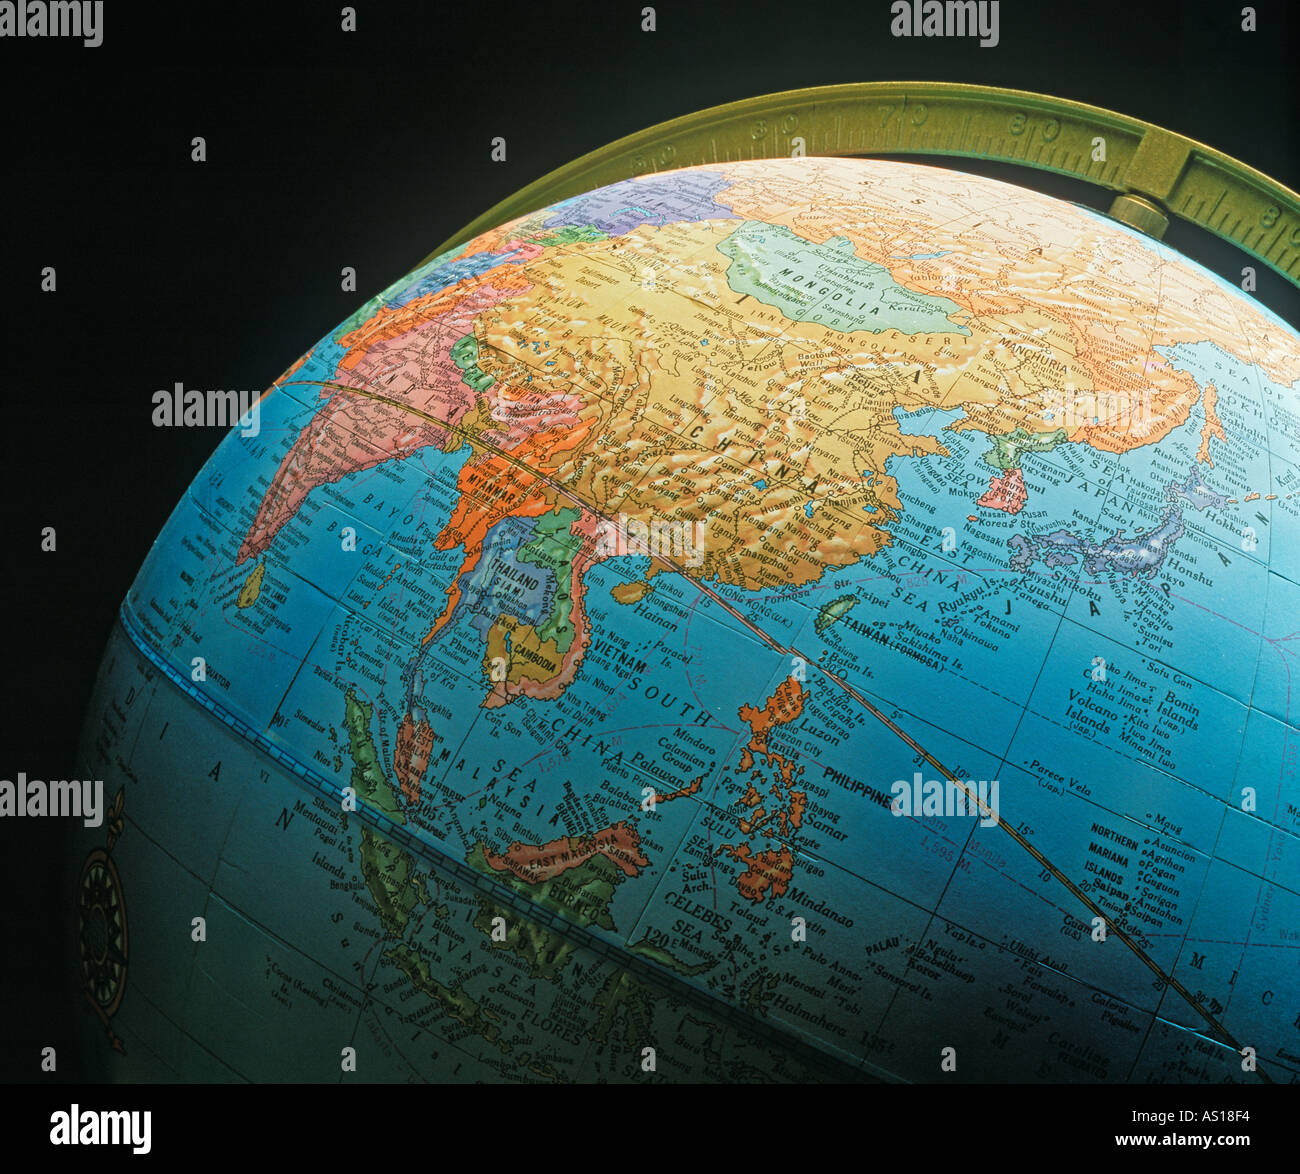 Globe showing Asia And the far east silhouetted on black background Stock Photo